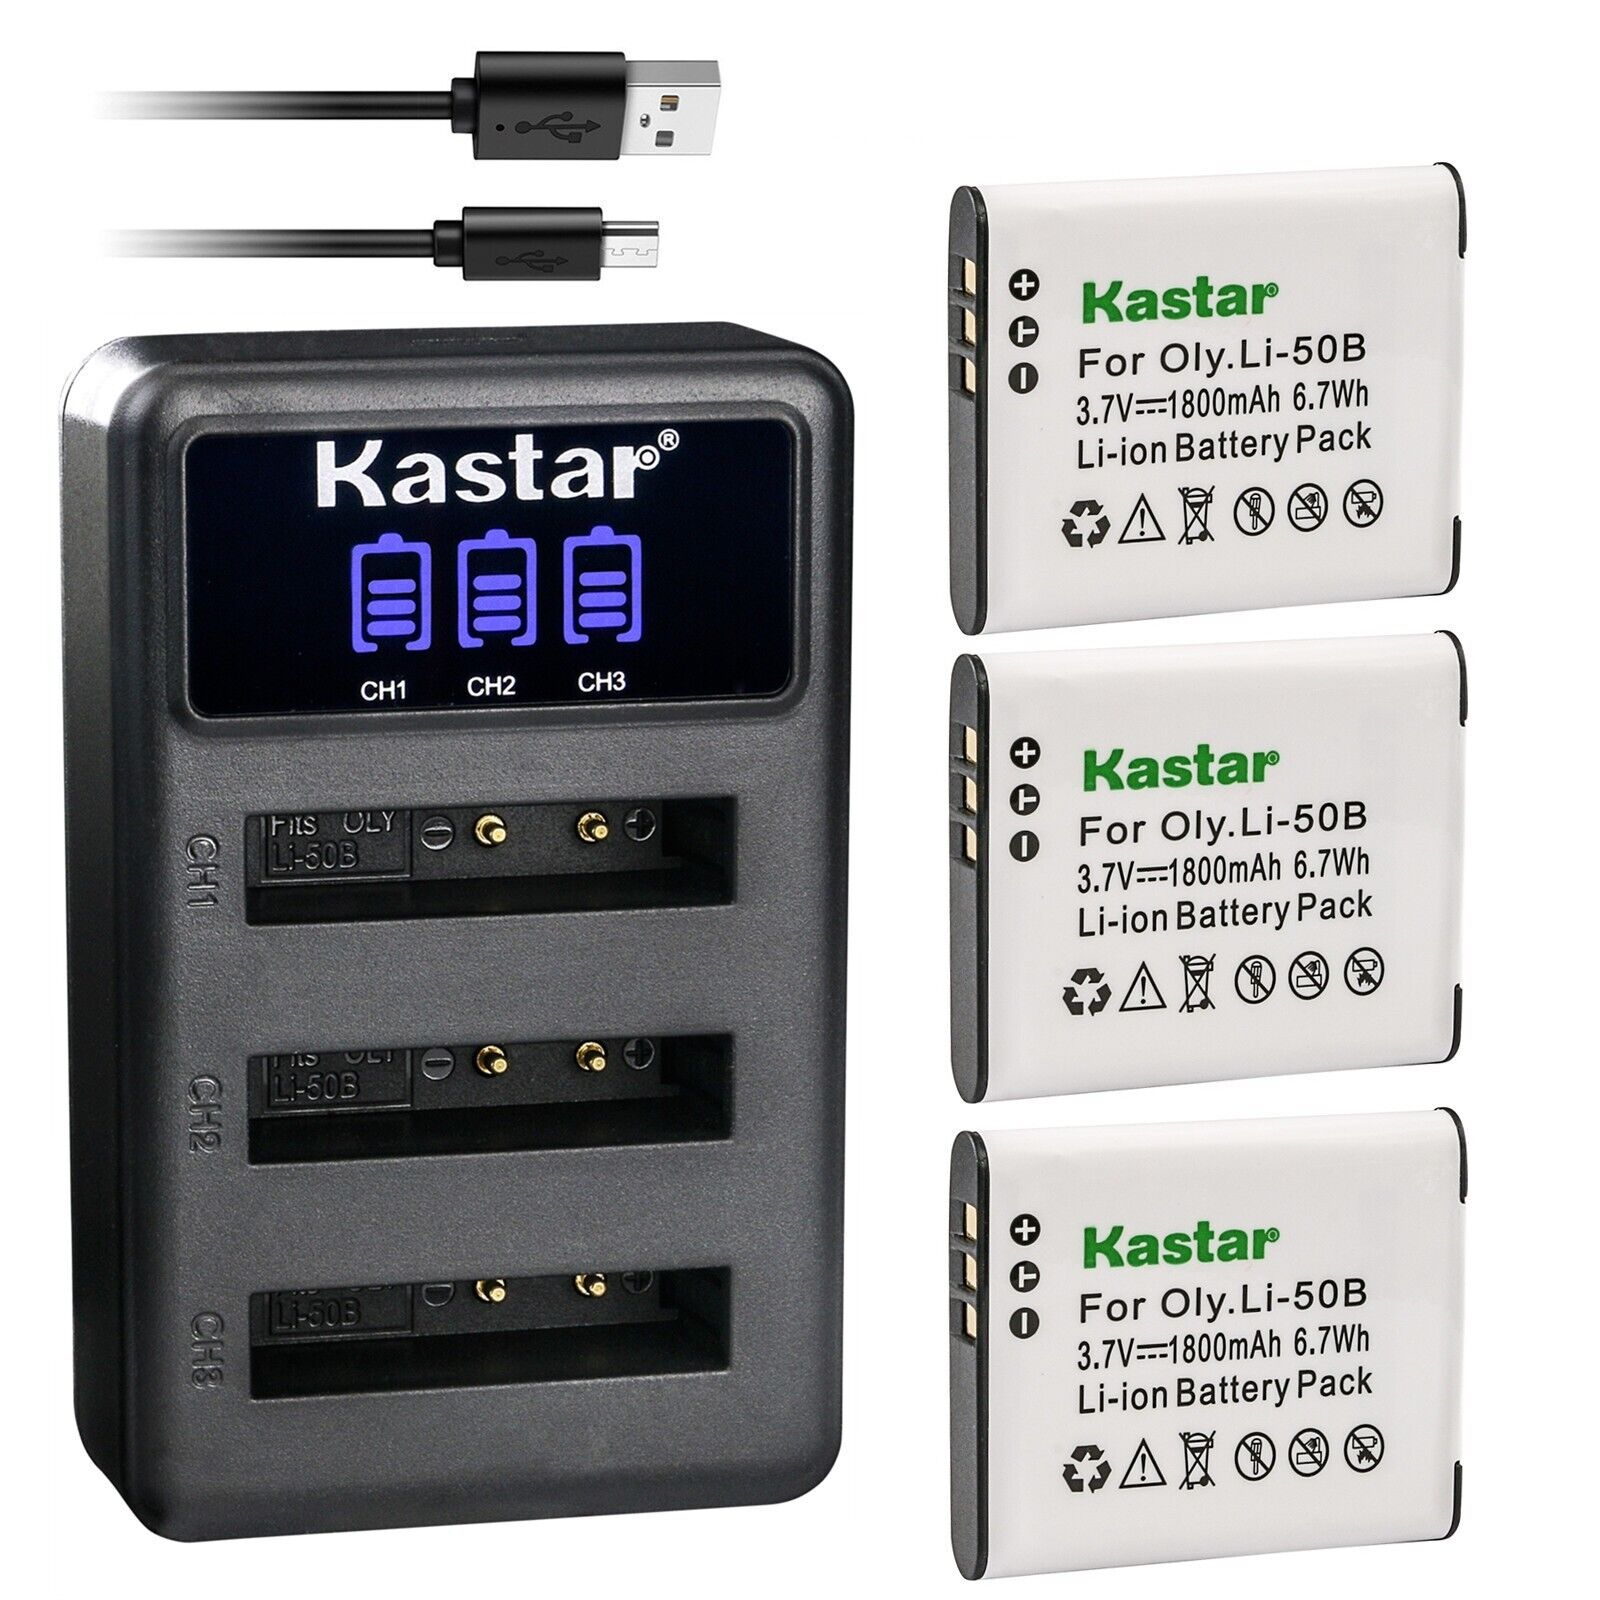 Kastar 3 Pack Battery and LCD Triple USB Charger Compatible with Olympus Traveller SH-21, Traveller SH-25MR, SP-720UZ, SP-800, SP-800UZ, SP-810, SP-810UZ, SP-815UZ, Stylus 1010, Stylus 1020 - image 1 of 6